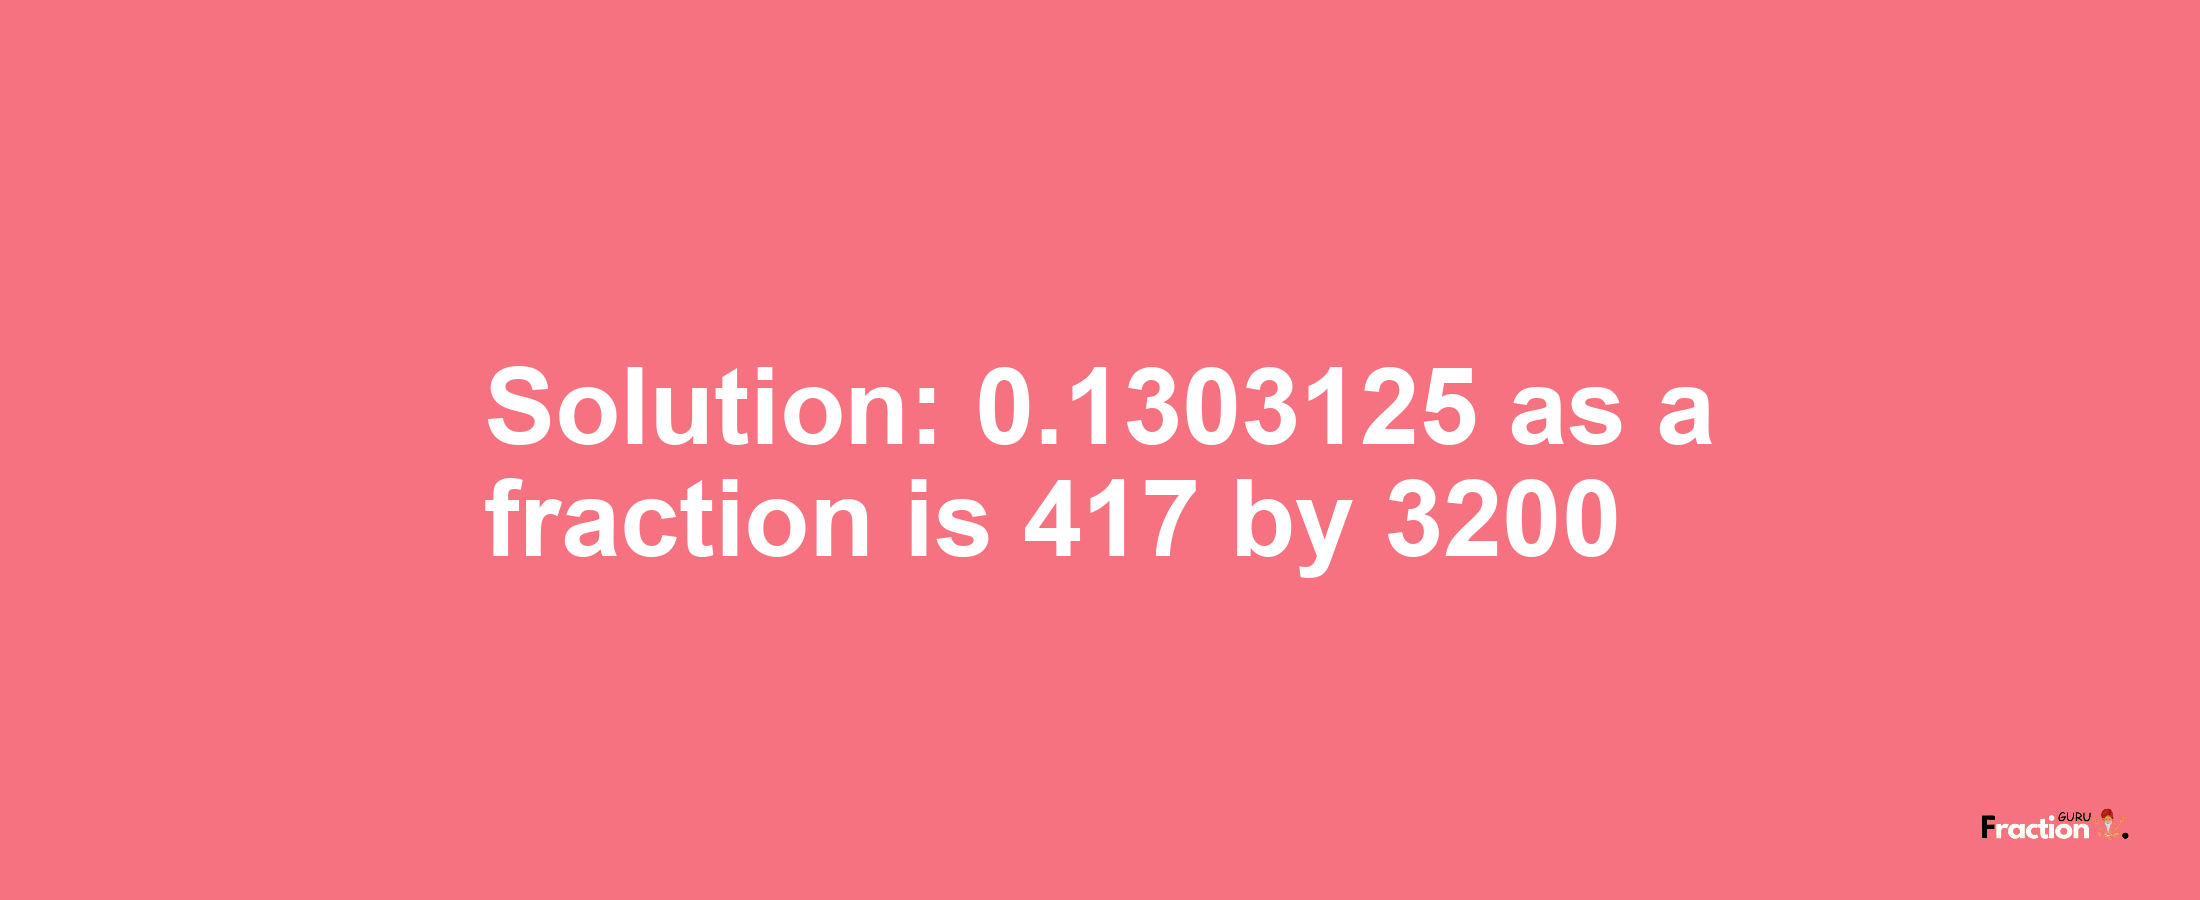 Solution:0.1303125 as a fraction is 417/3200